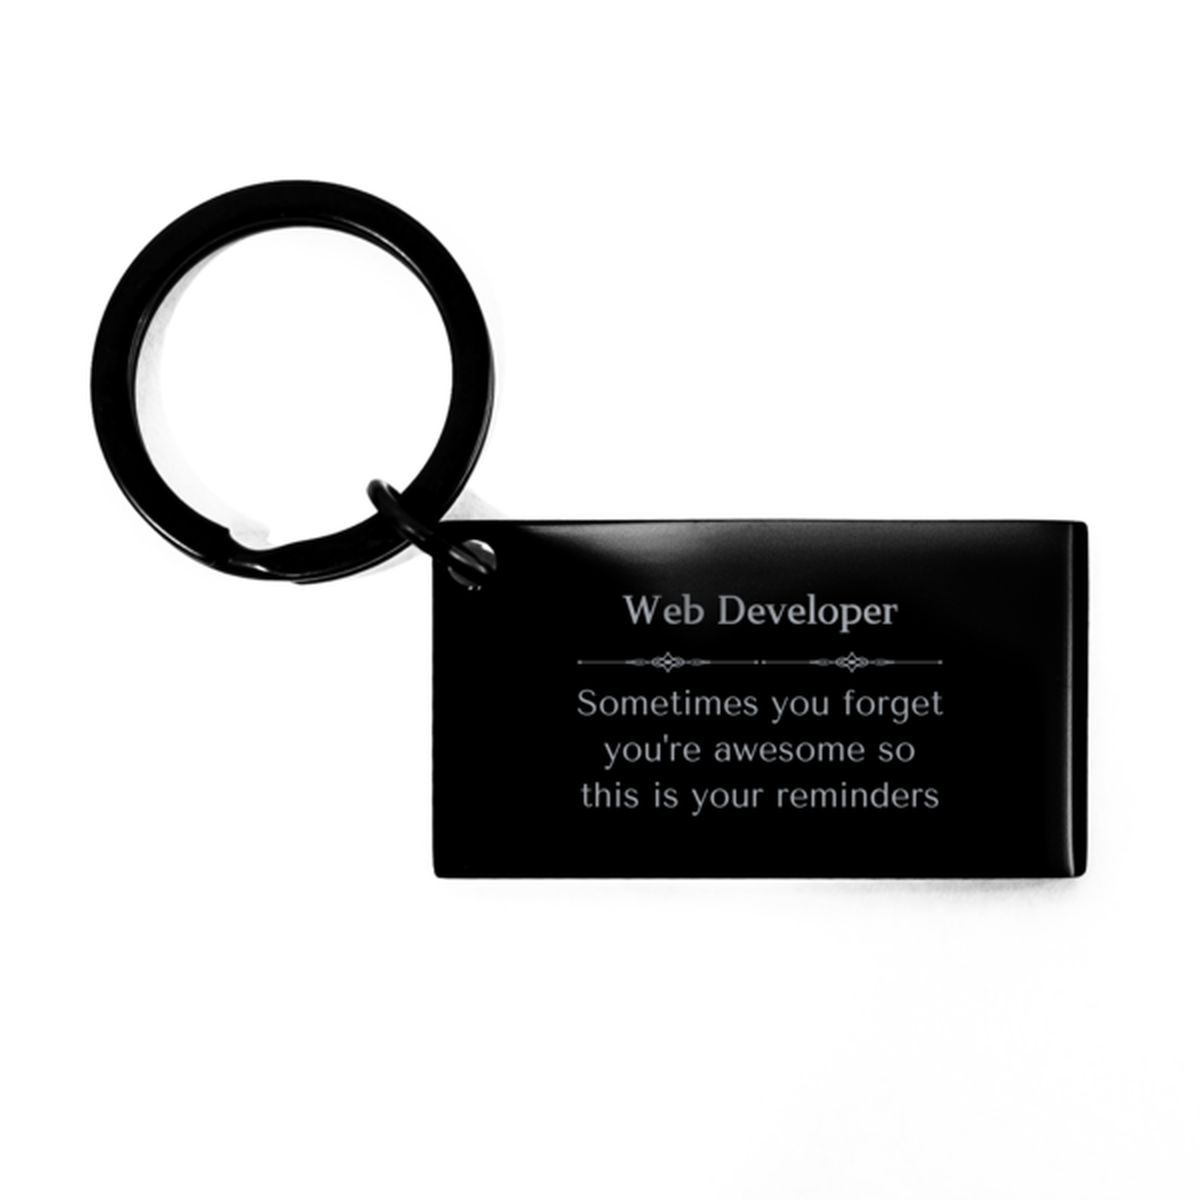 Sentimental Web Developer Keychain, Assistant Sometimes you forget you're awesome so this is your reminders, Graduation Christmas Birthday Gifts for Web Developer, Men, Women, Coworkers